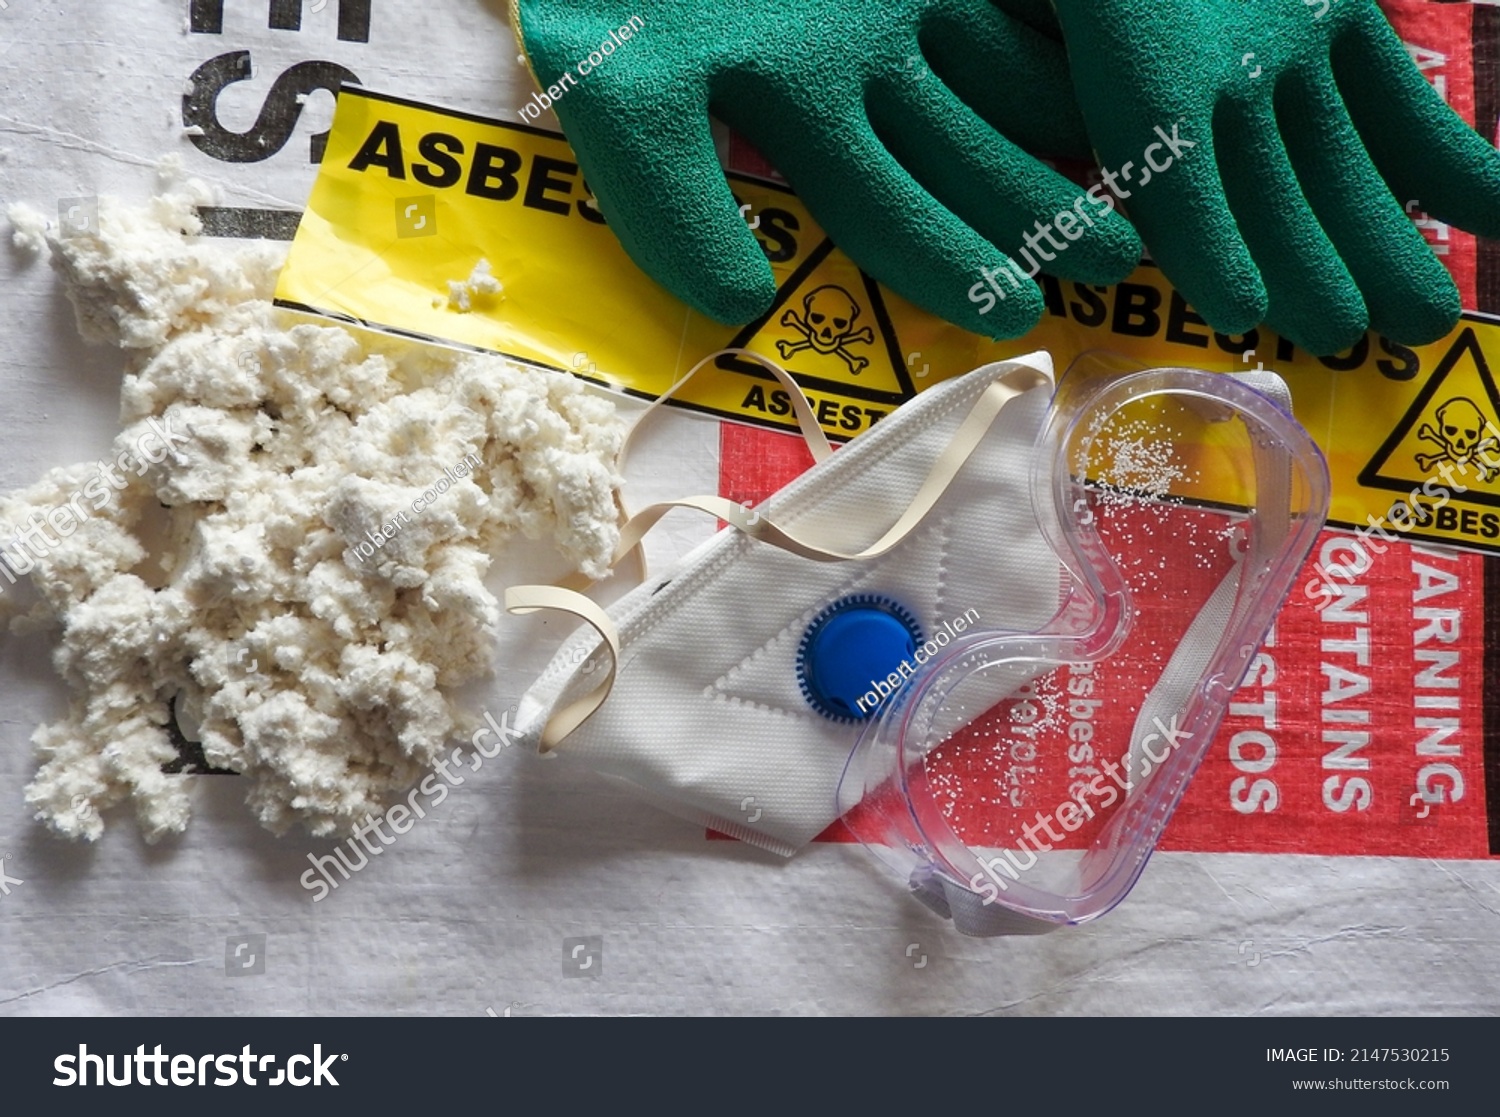 Close up asbestos, fibers, mask, filter, gloves and goggles. Bag in background. Barrier tape, warning forbidden acces, hazard. Asbestos removal. Asbestosis, lungcancer, mesothelioma. Protection, serie #2147530215